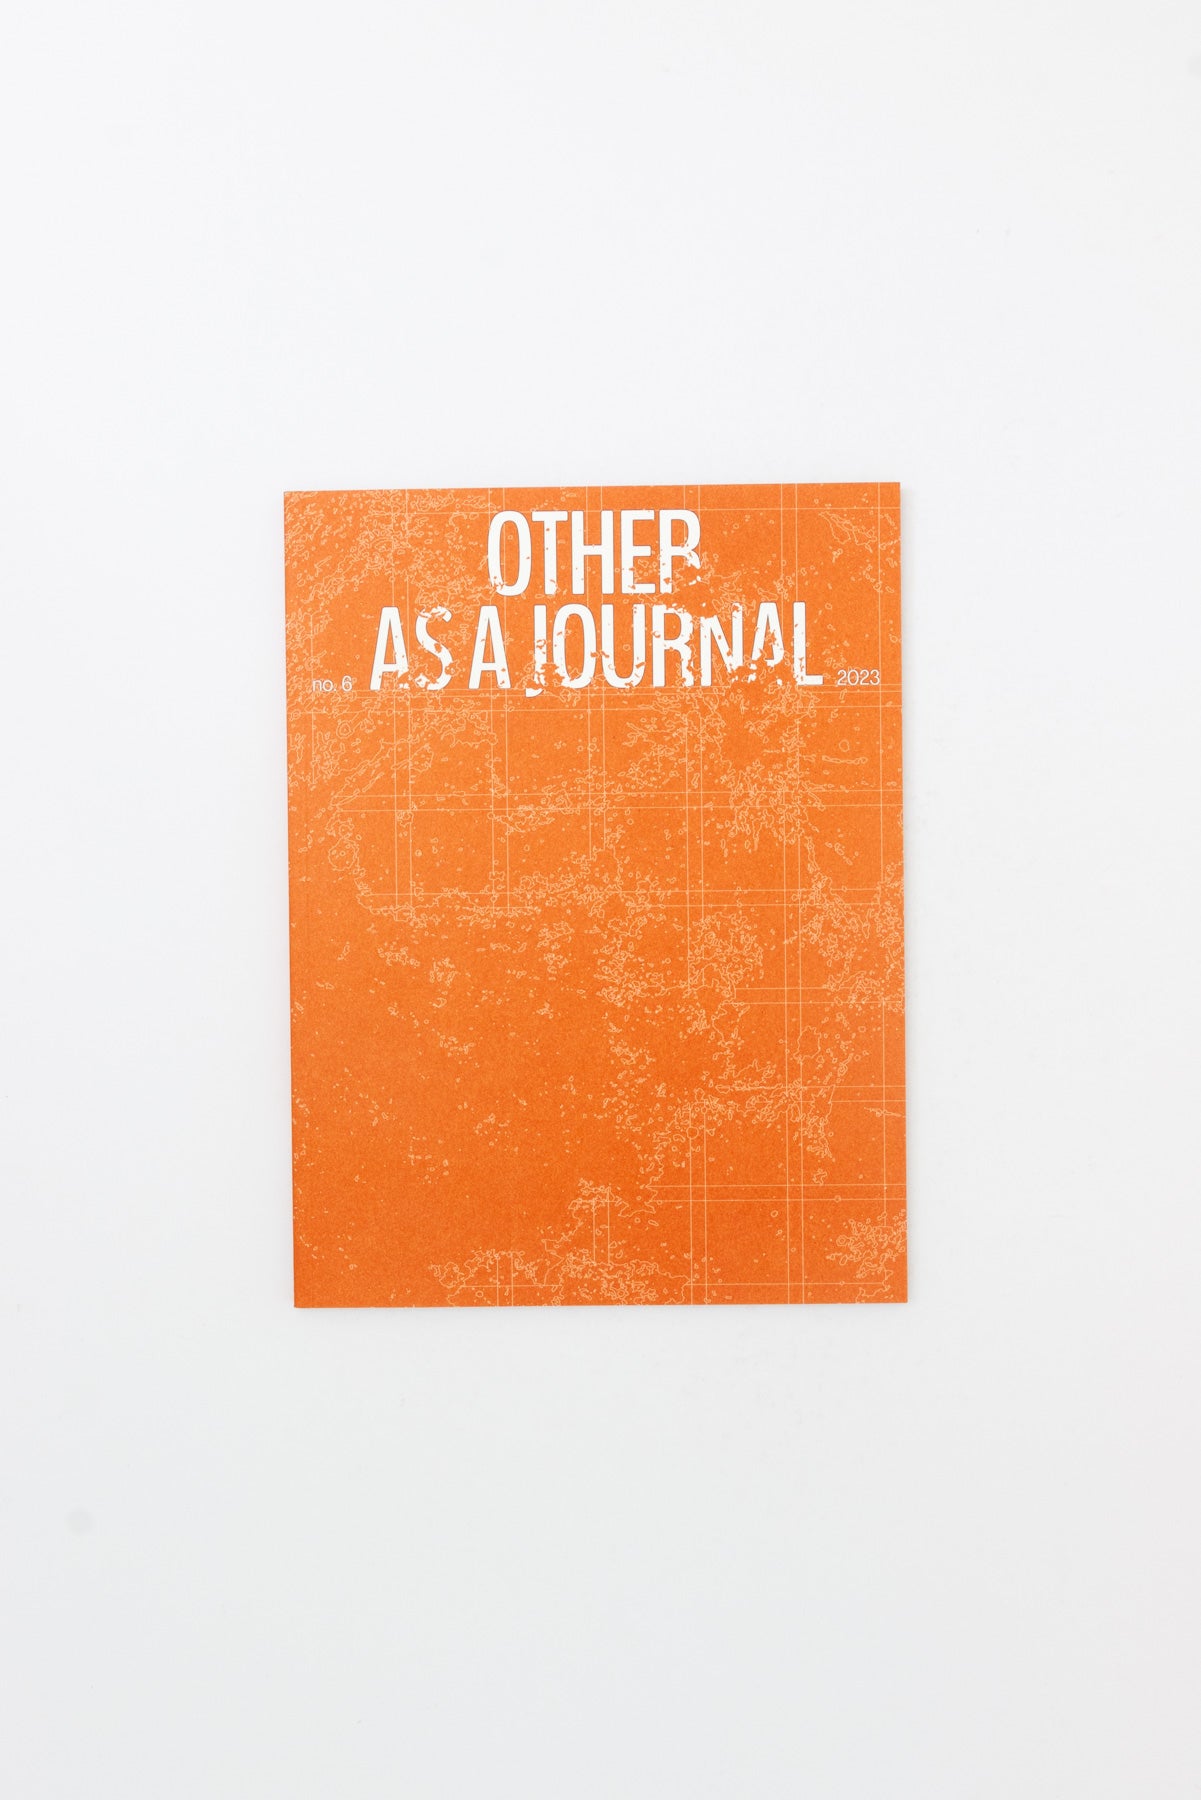 As a Journal. Issue 6: Other.